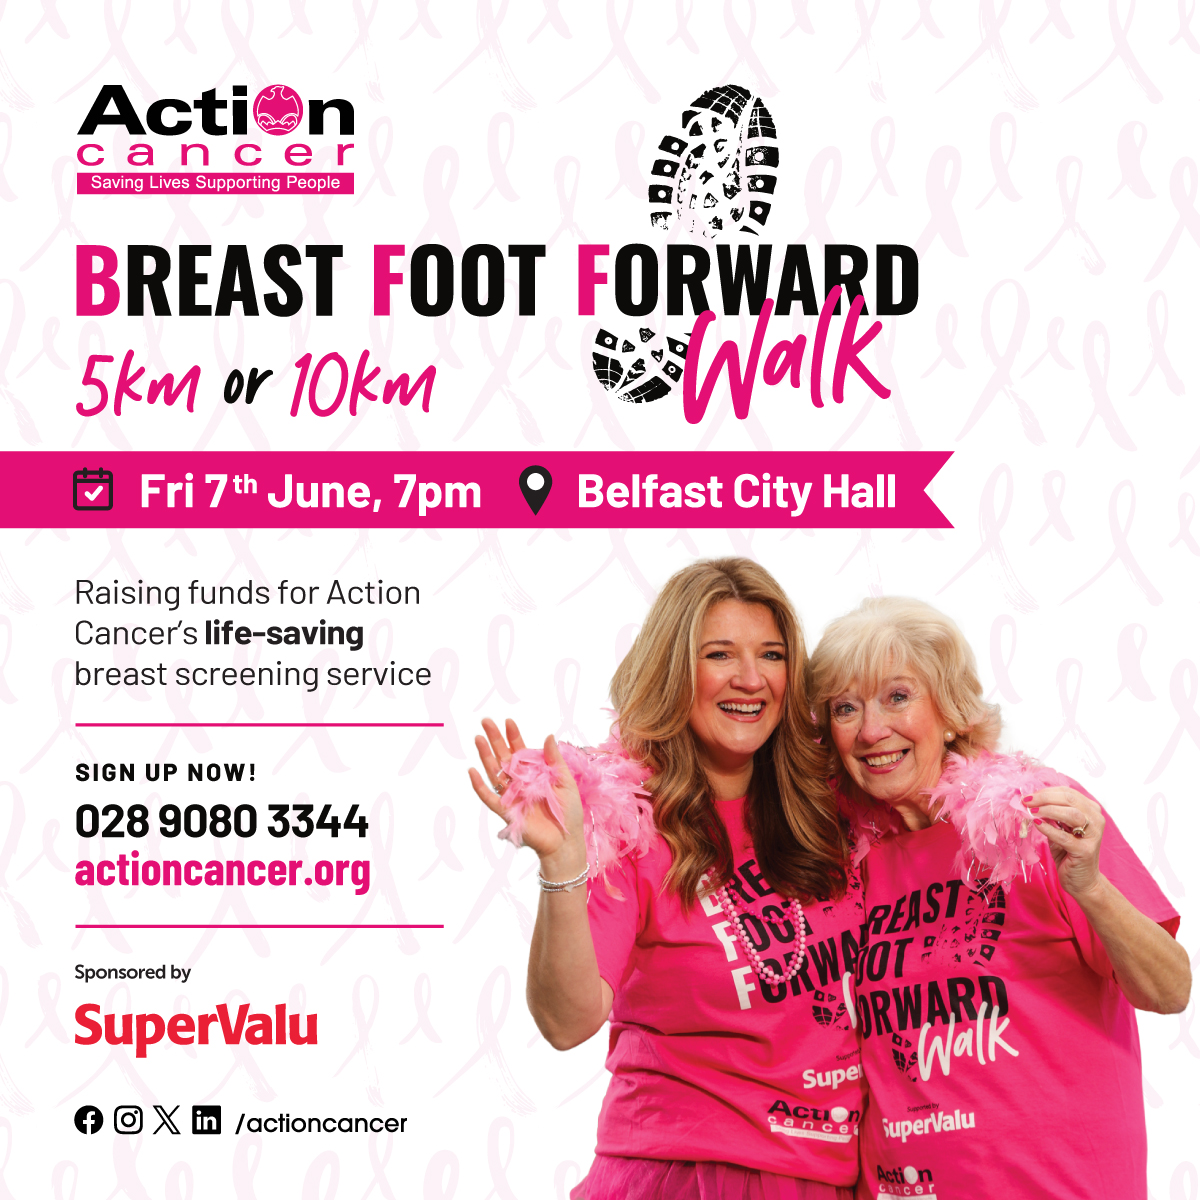 EARLY BIRD REGISTRATION IS NOW OPEN! Offer until 30th April🎫Adult £10 & Child £5. Early bird sign-ups have the chance to win an overnight stay at a local hotel!🏨 ✍️Sign up at actioncancer.org Our Breast Foot Forward Walk is kindly sponsored by SuperValu NI #BFFwalk